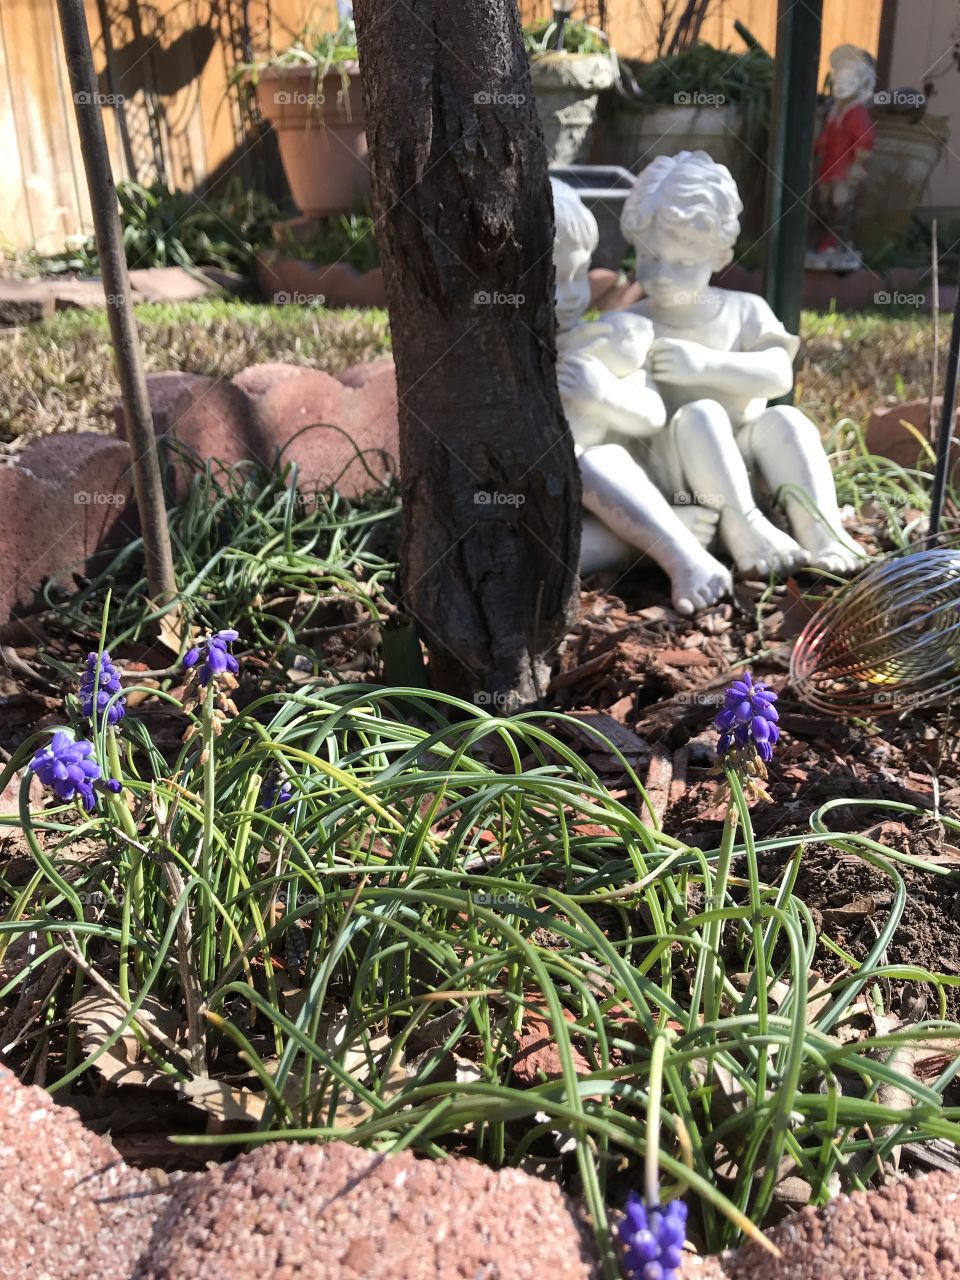 First blooms of spring for readers in garden!